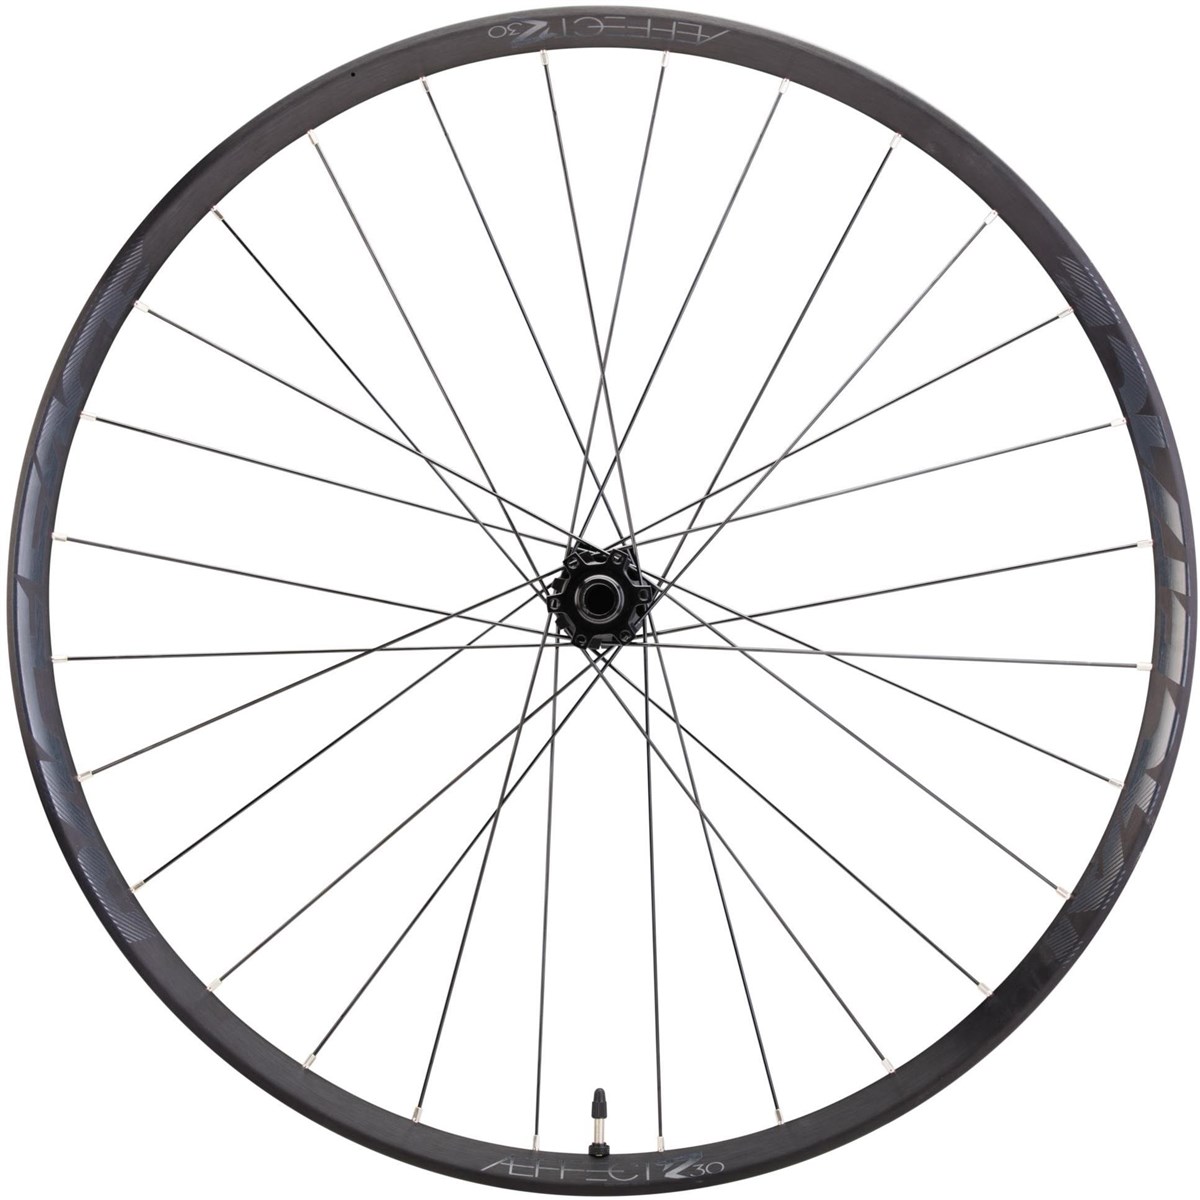 Race Face AEffect R Wheels - 27.5" product image